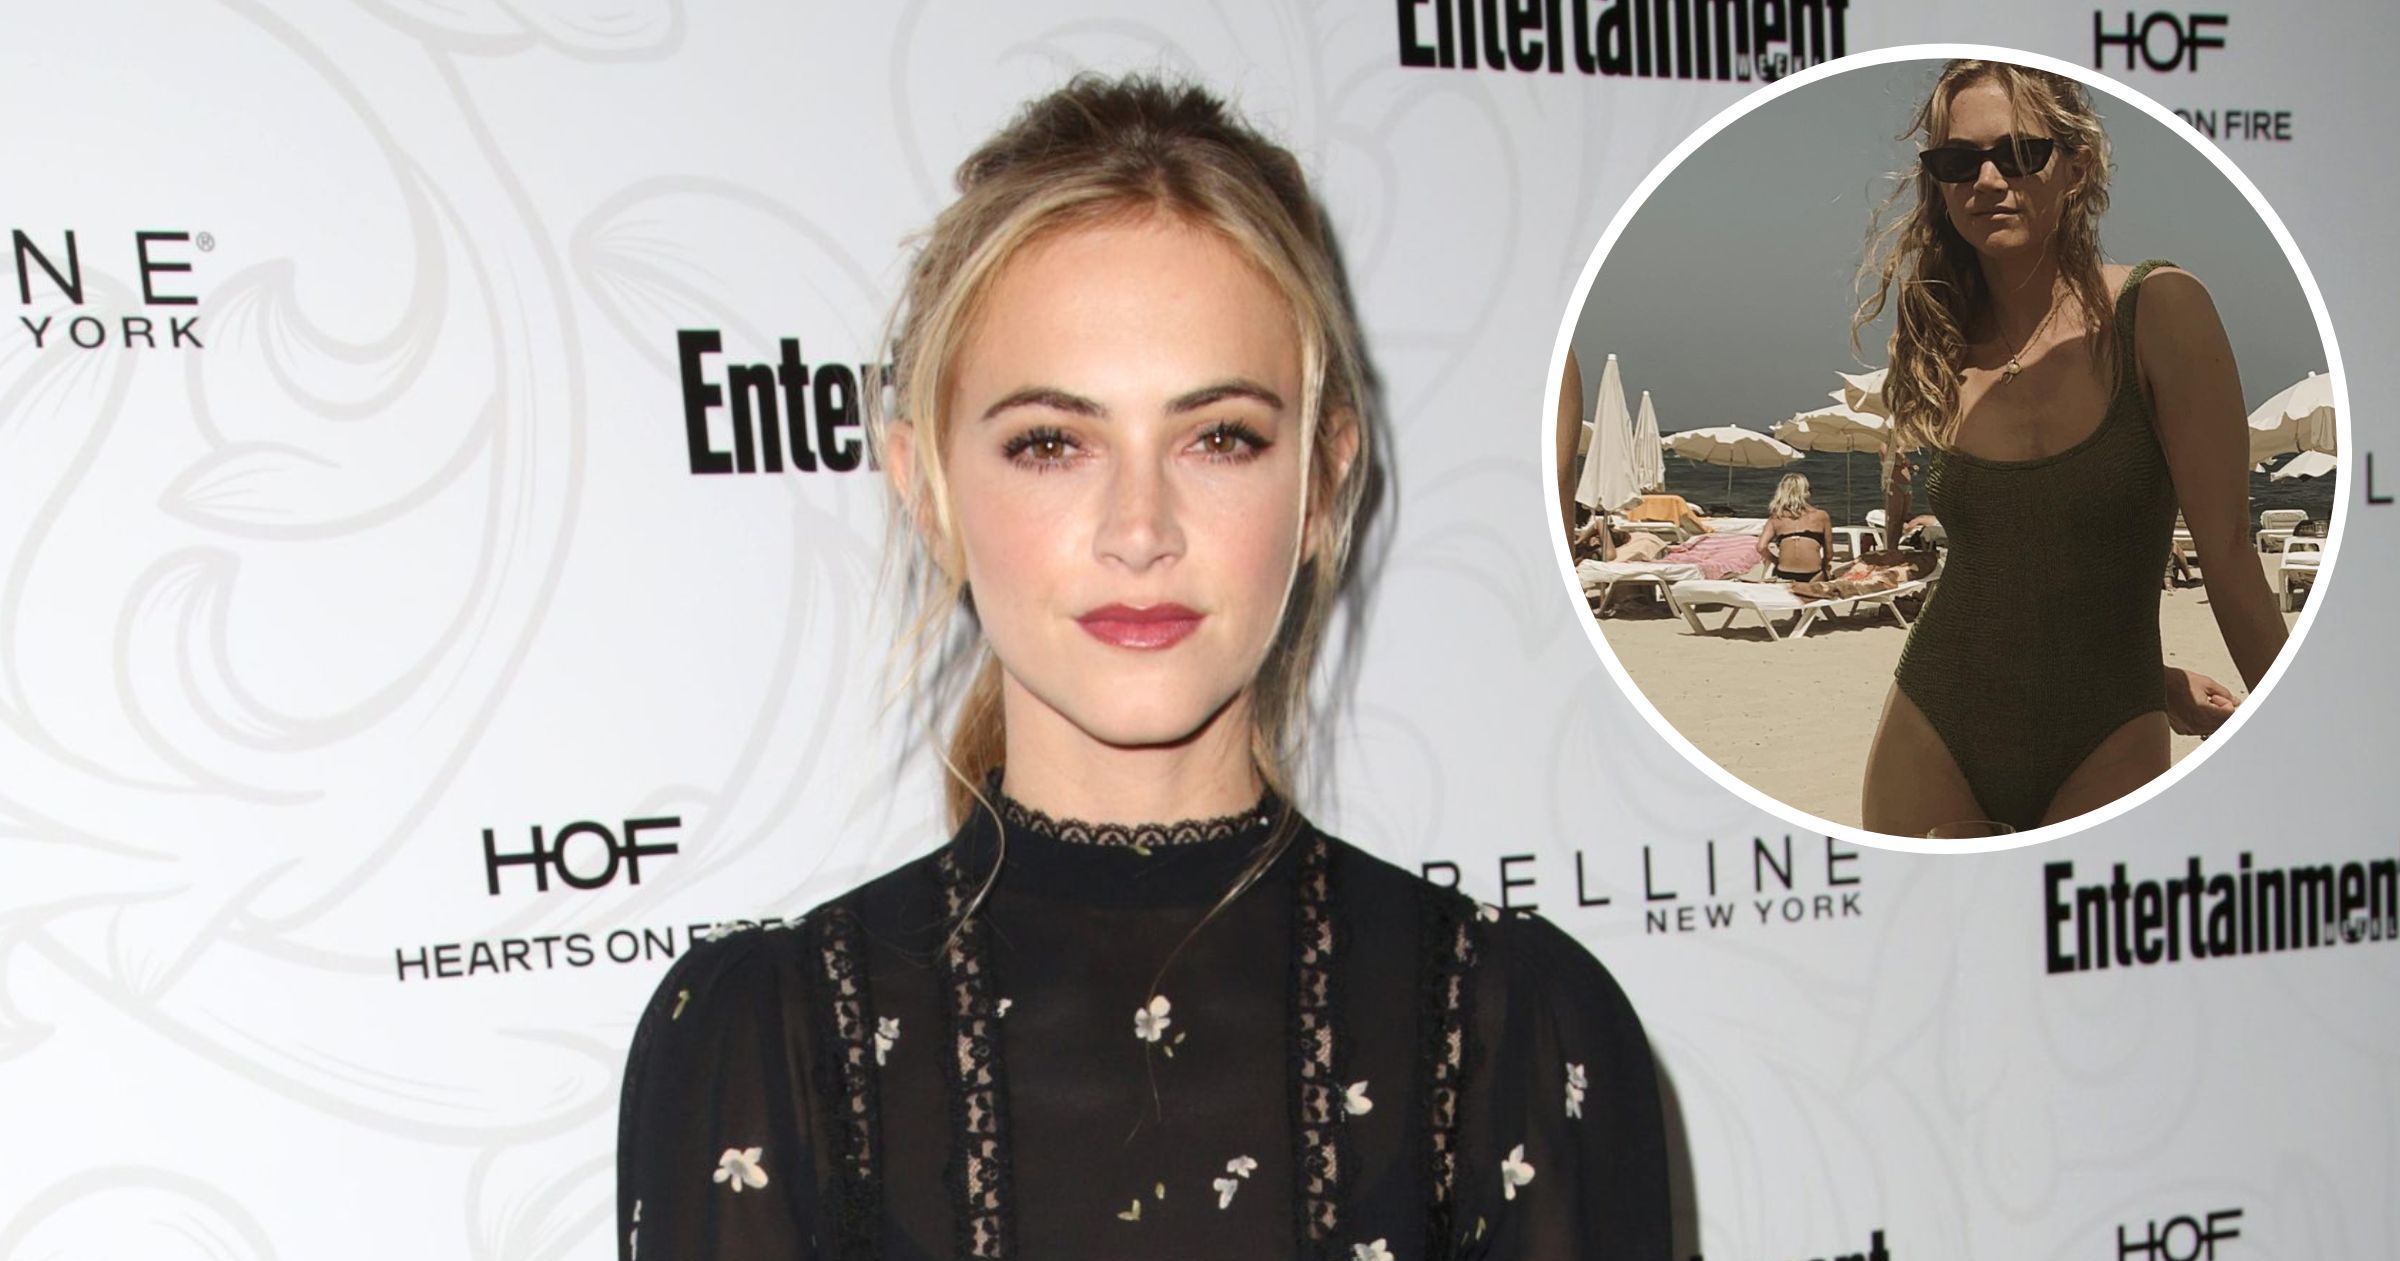 brendon groenewald recommends pictures of emily wickersham pic